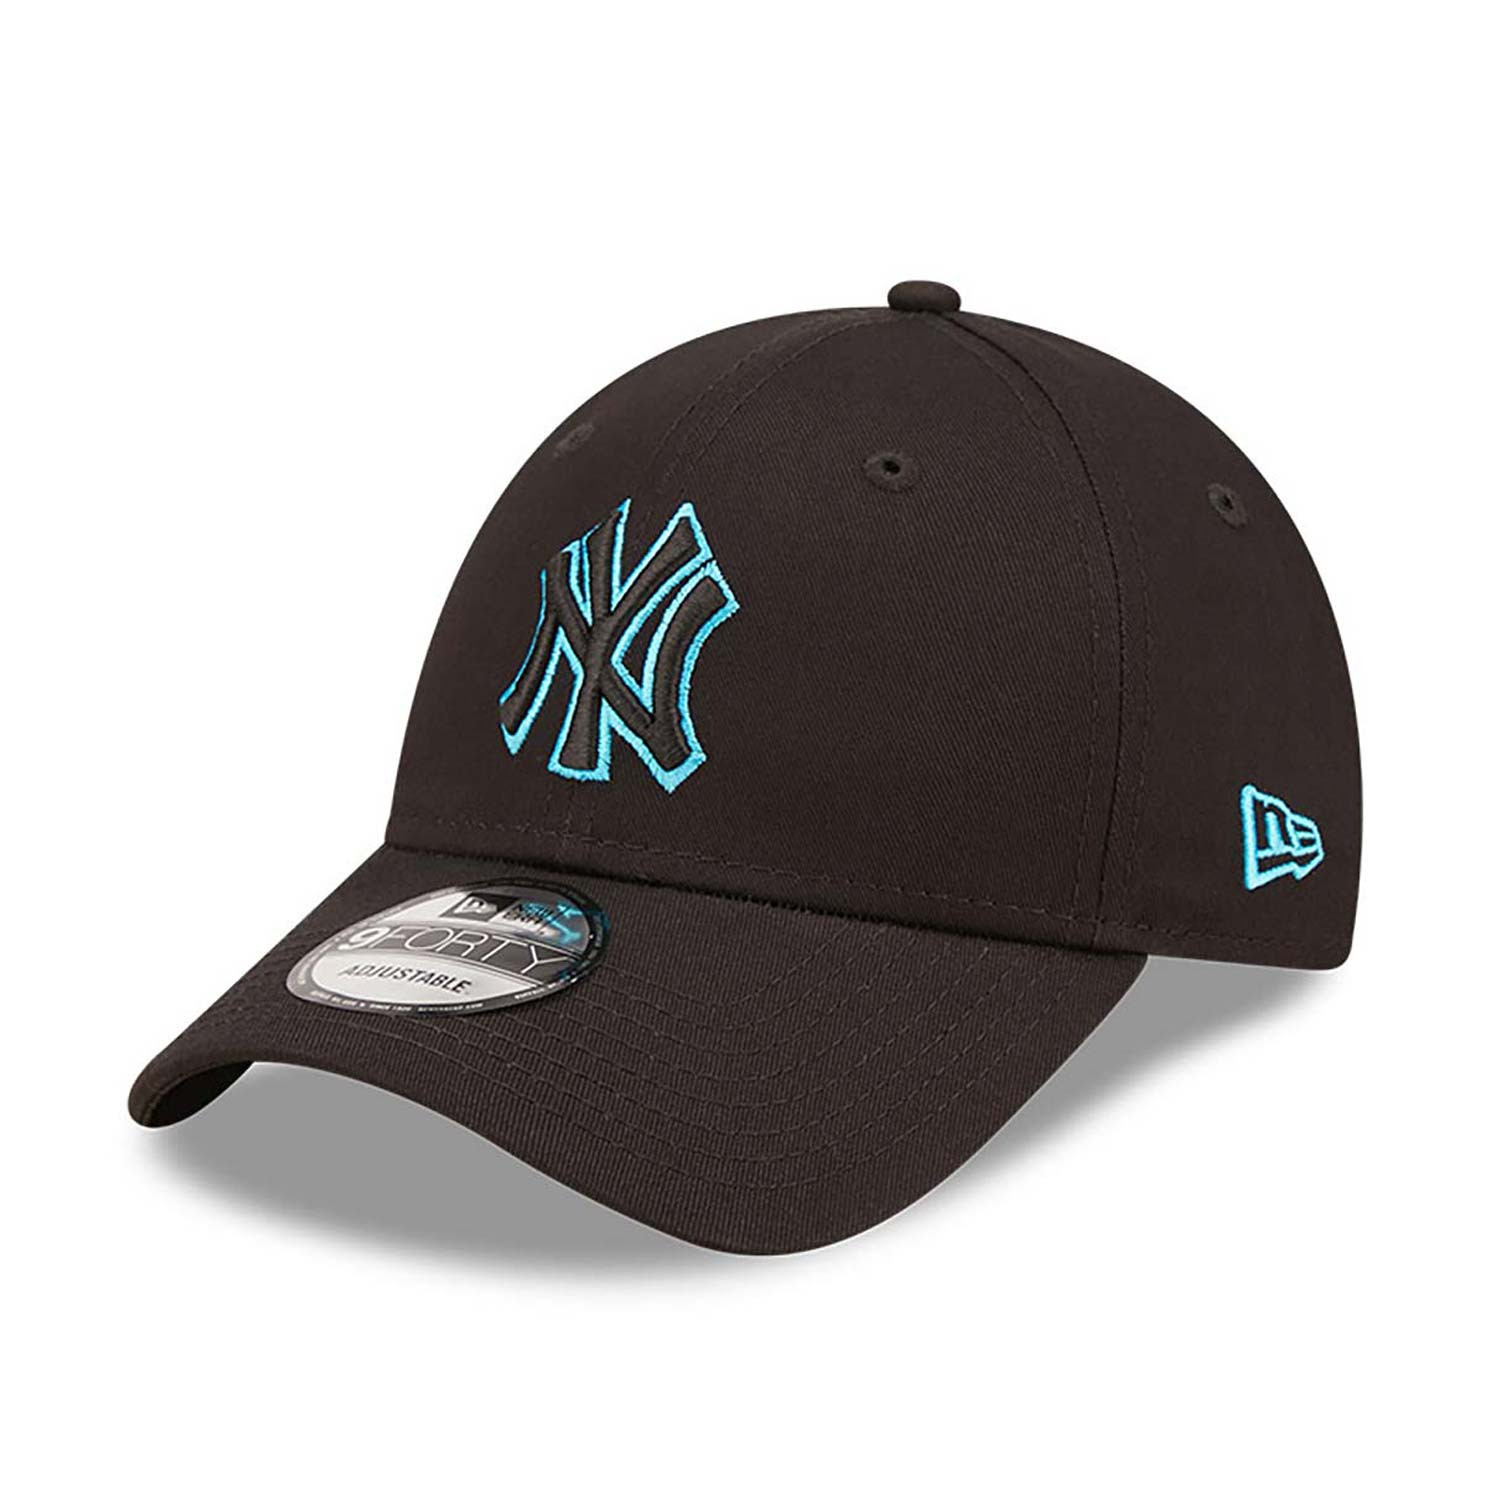 NEW ERA NEON OUTLINE 9FORTY